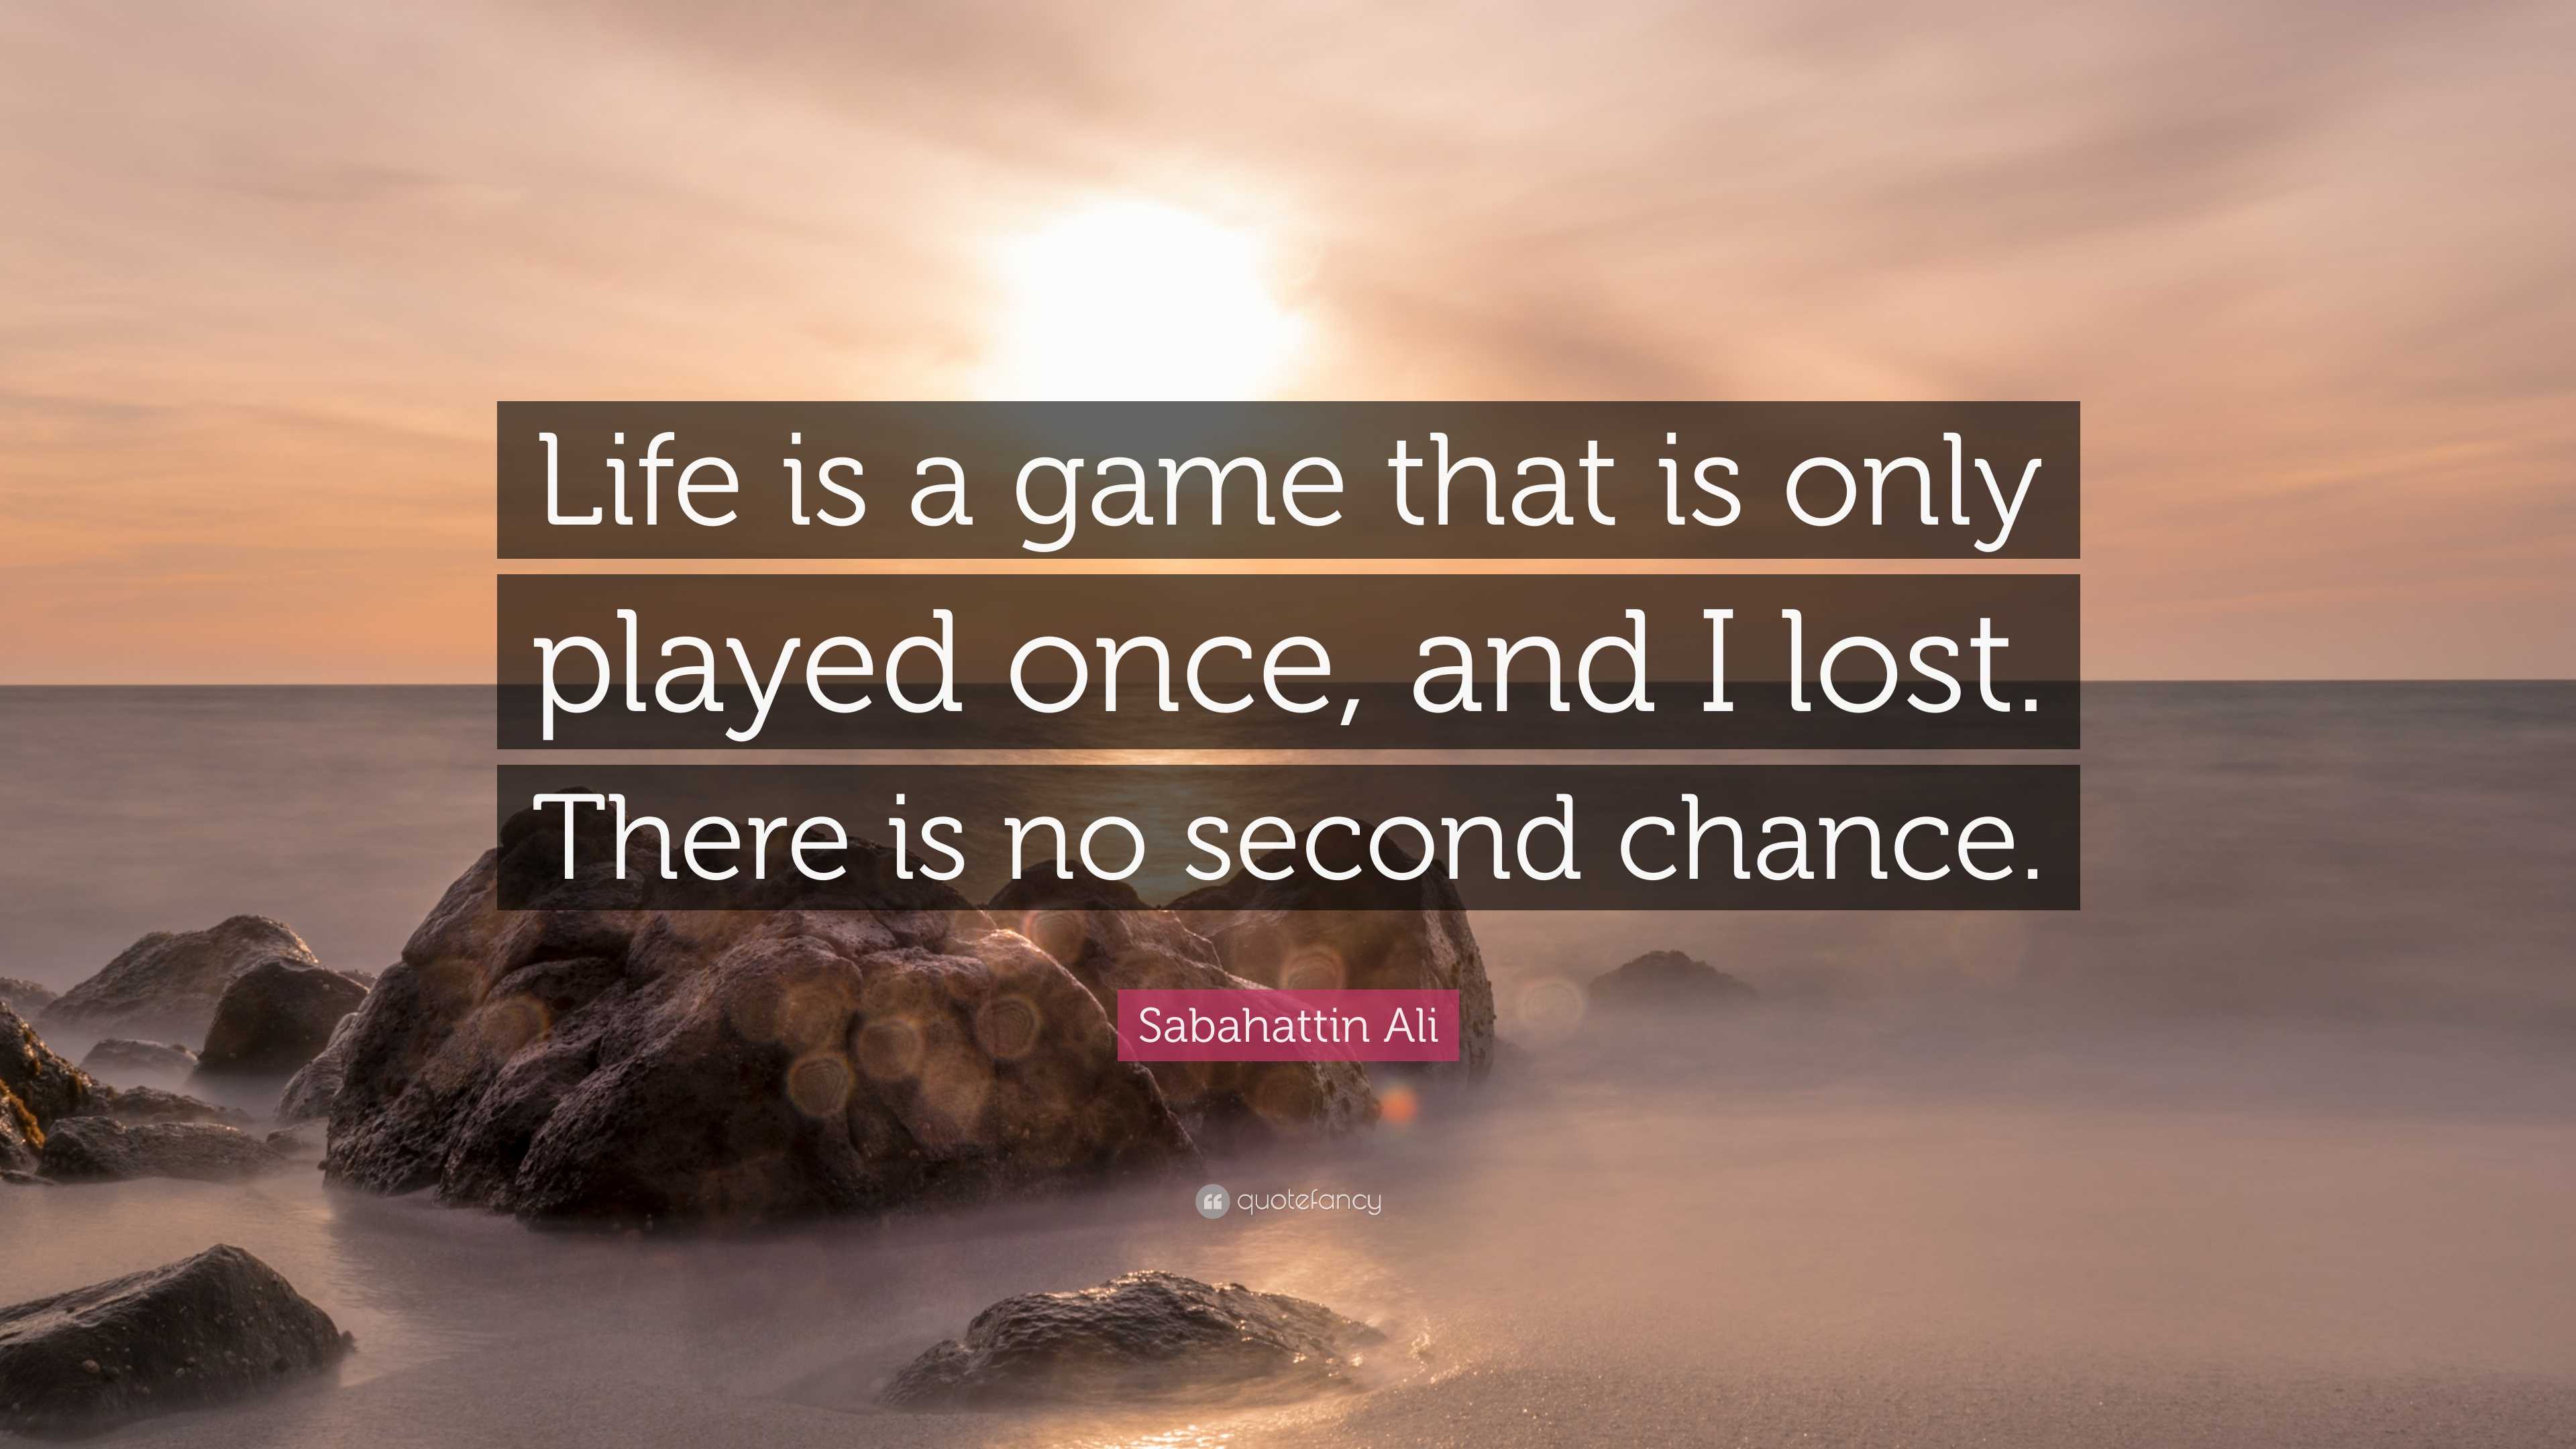 Sabahattin Ali Quote: “Life is a game that is only played once, and I lost.  There